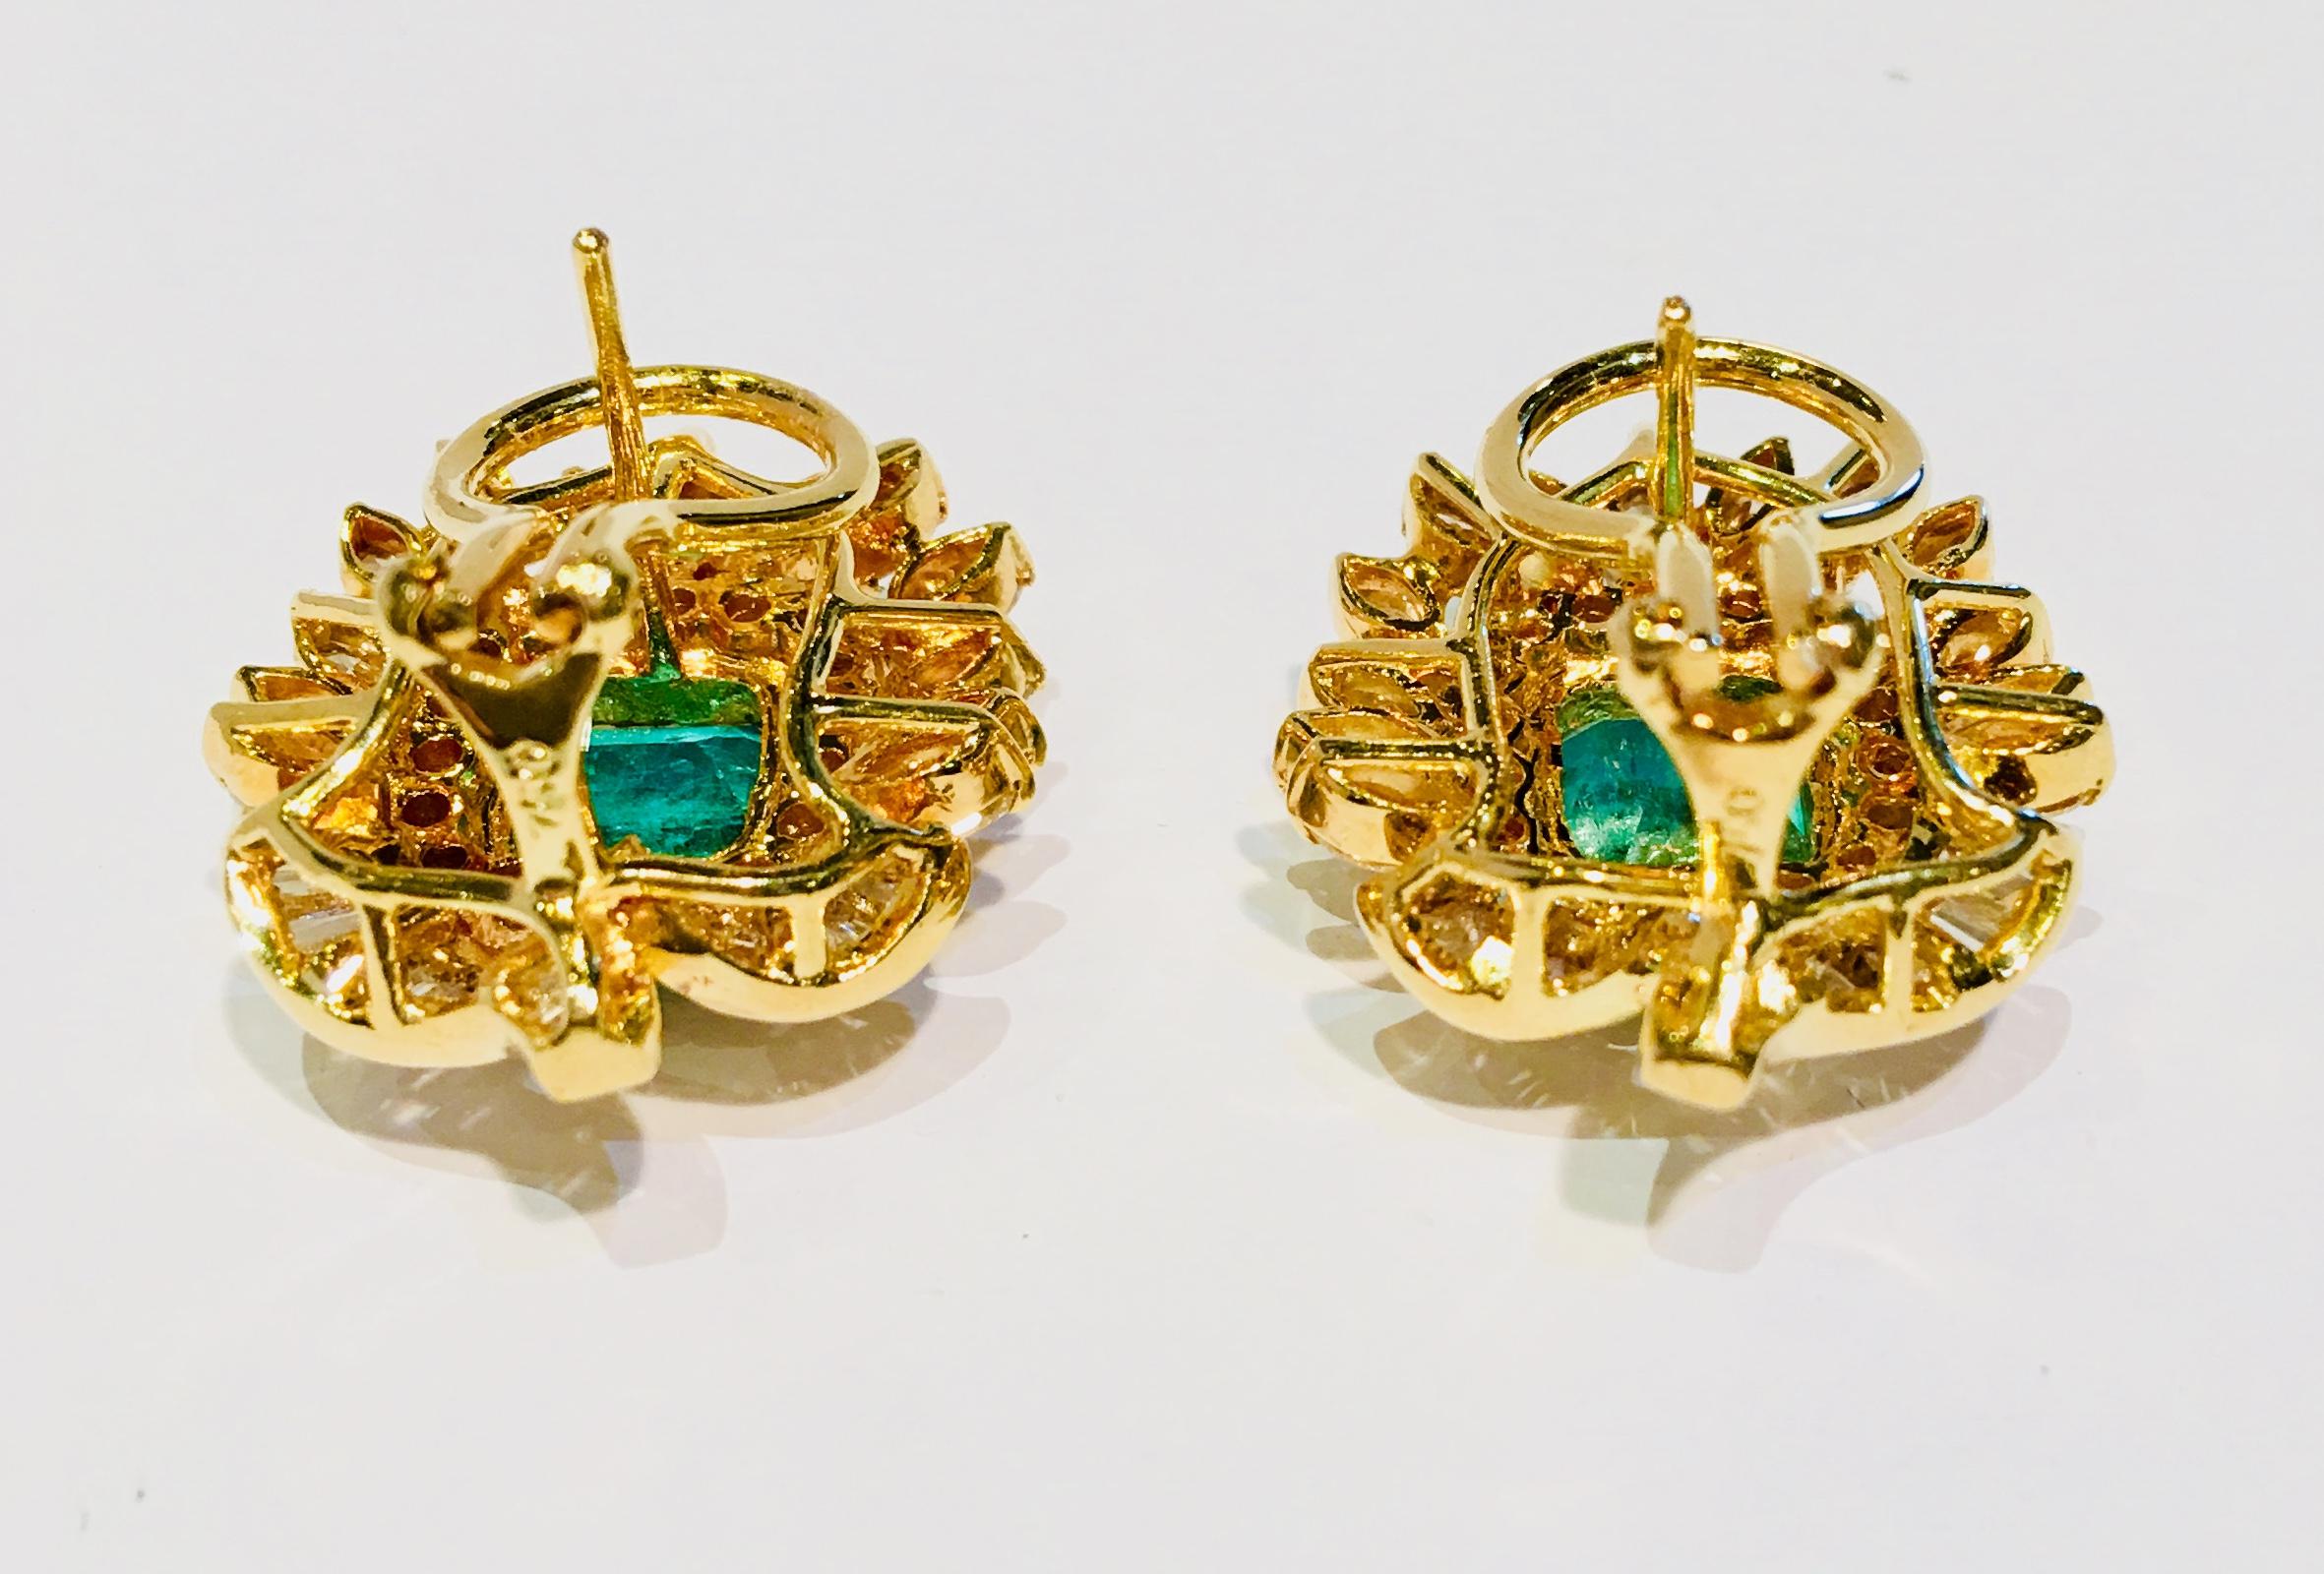 Exquisite Emerald and Diamond 18 Karat Yellow Gold Earrings with Floral Motif In Excellent Condition For Sale In Tustin, CA